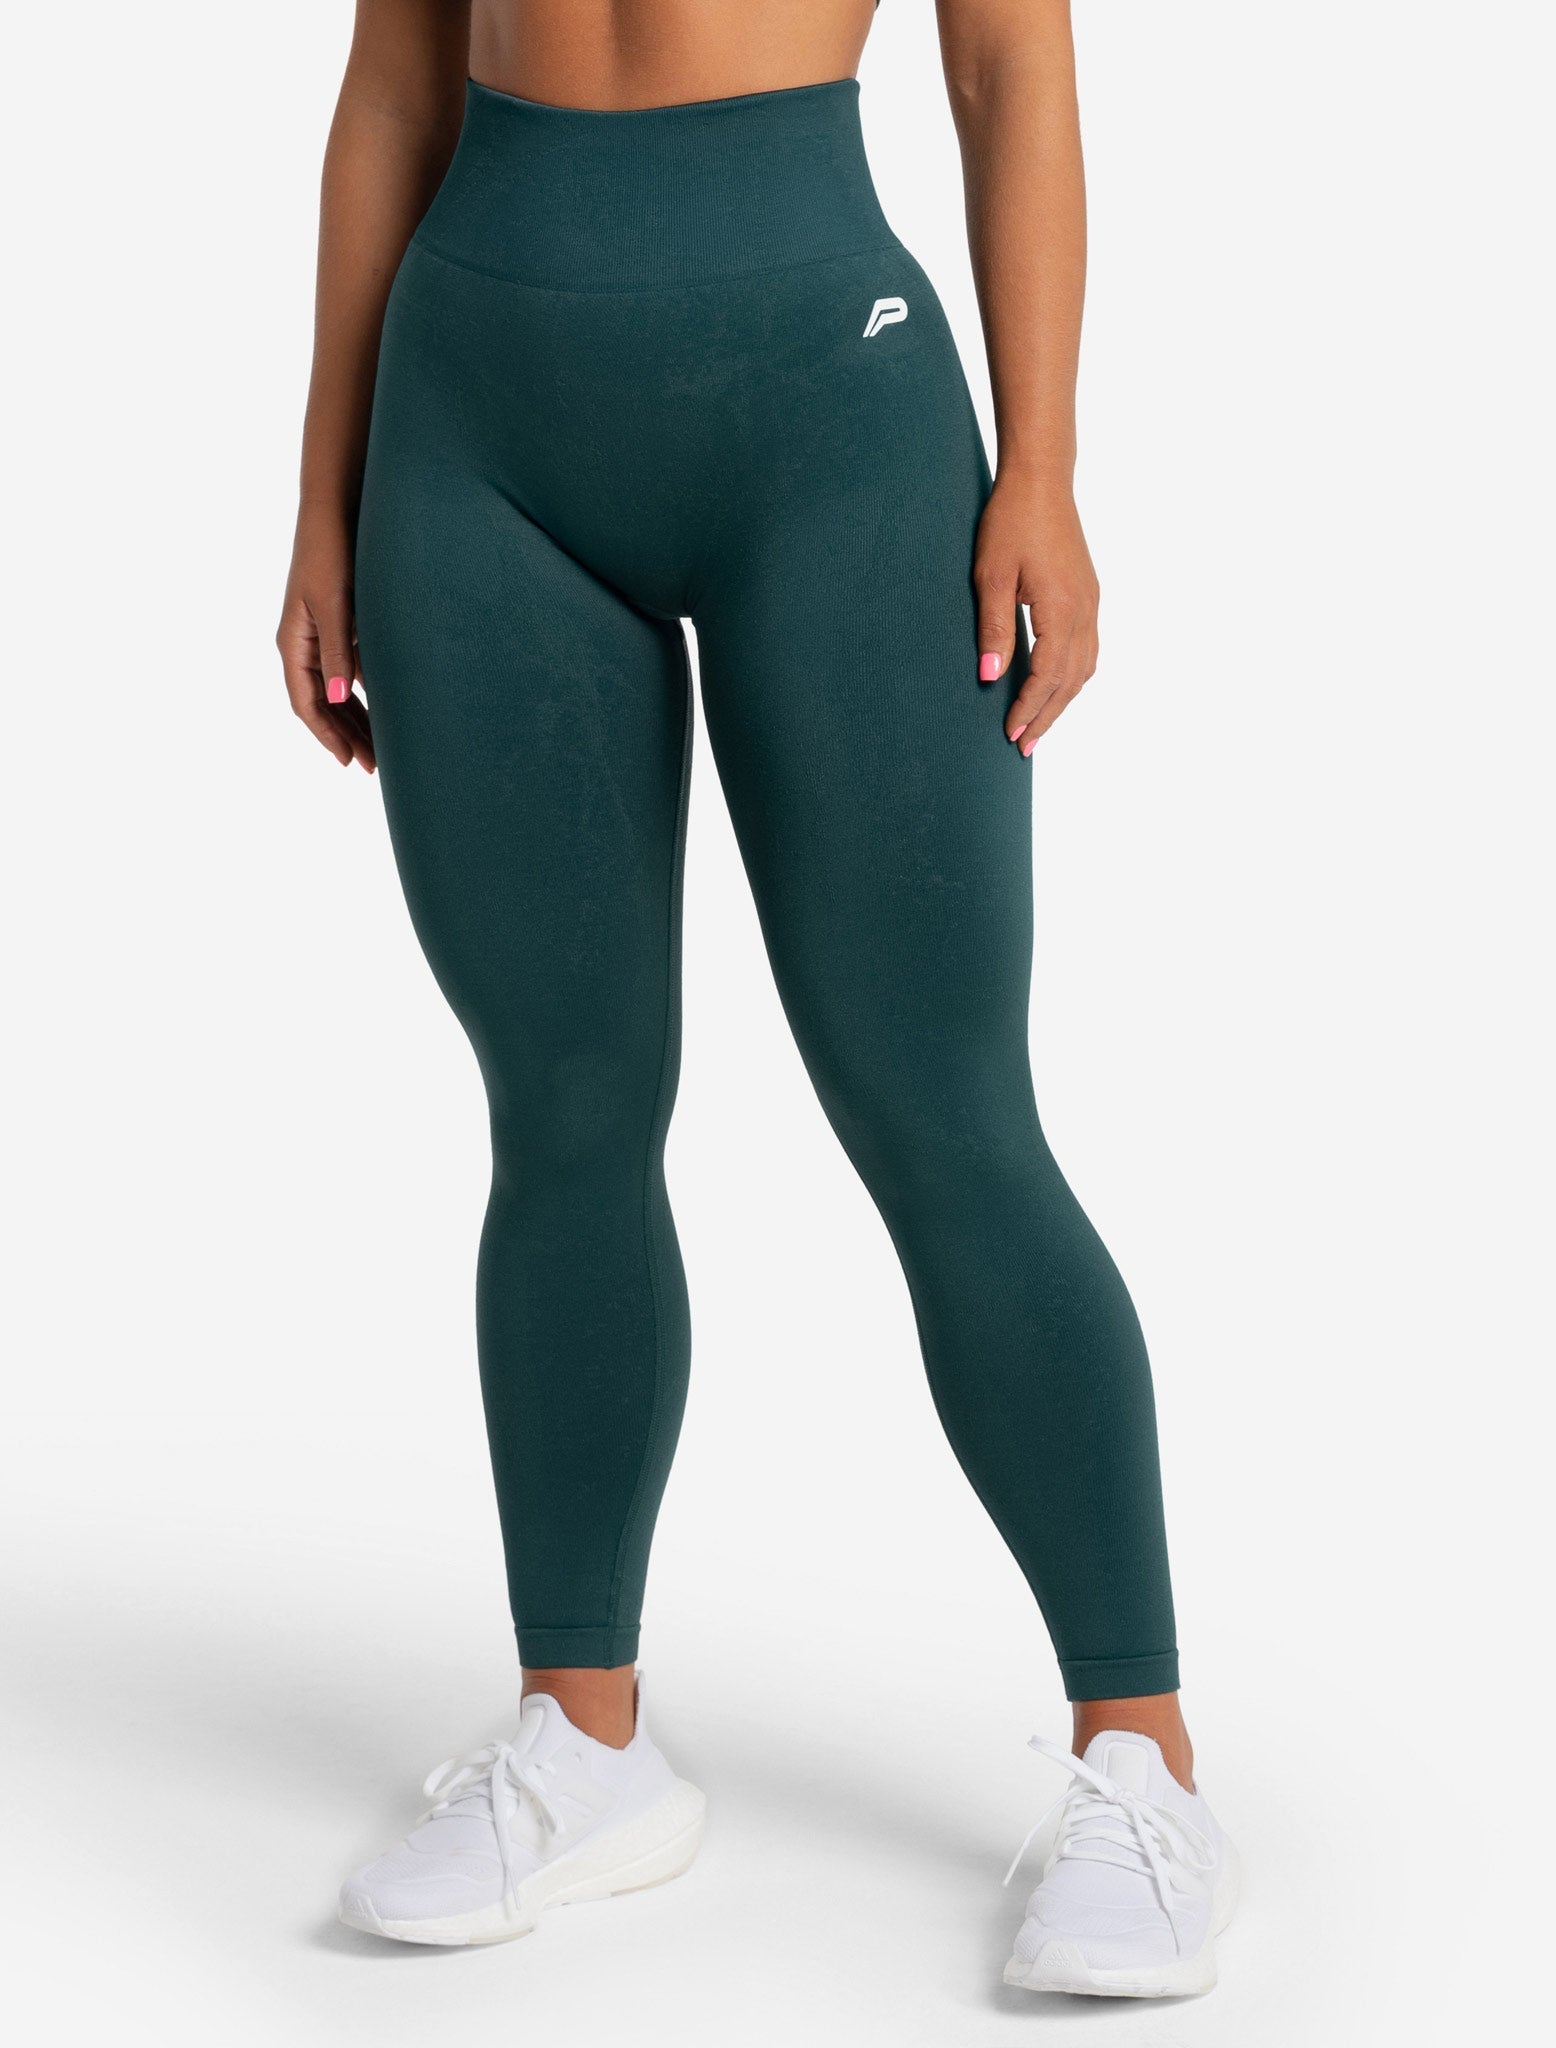 H&m Workout Leggings Reviewed  International Society of Precision  Agriculture